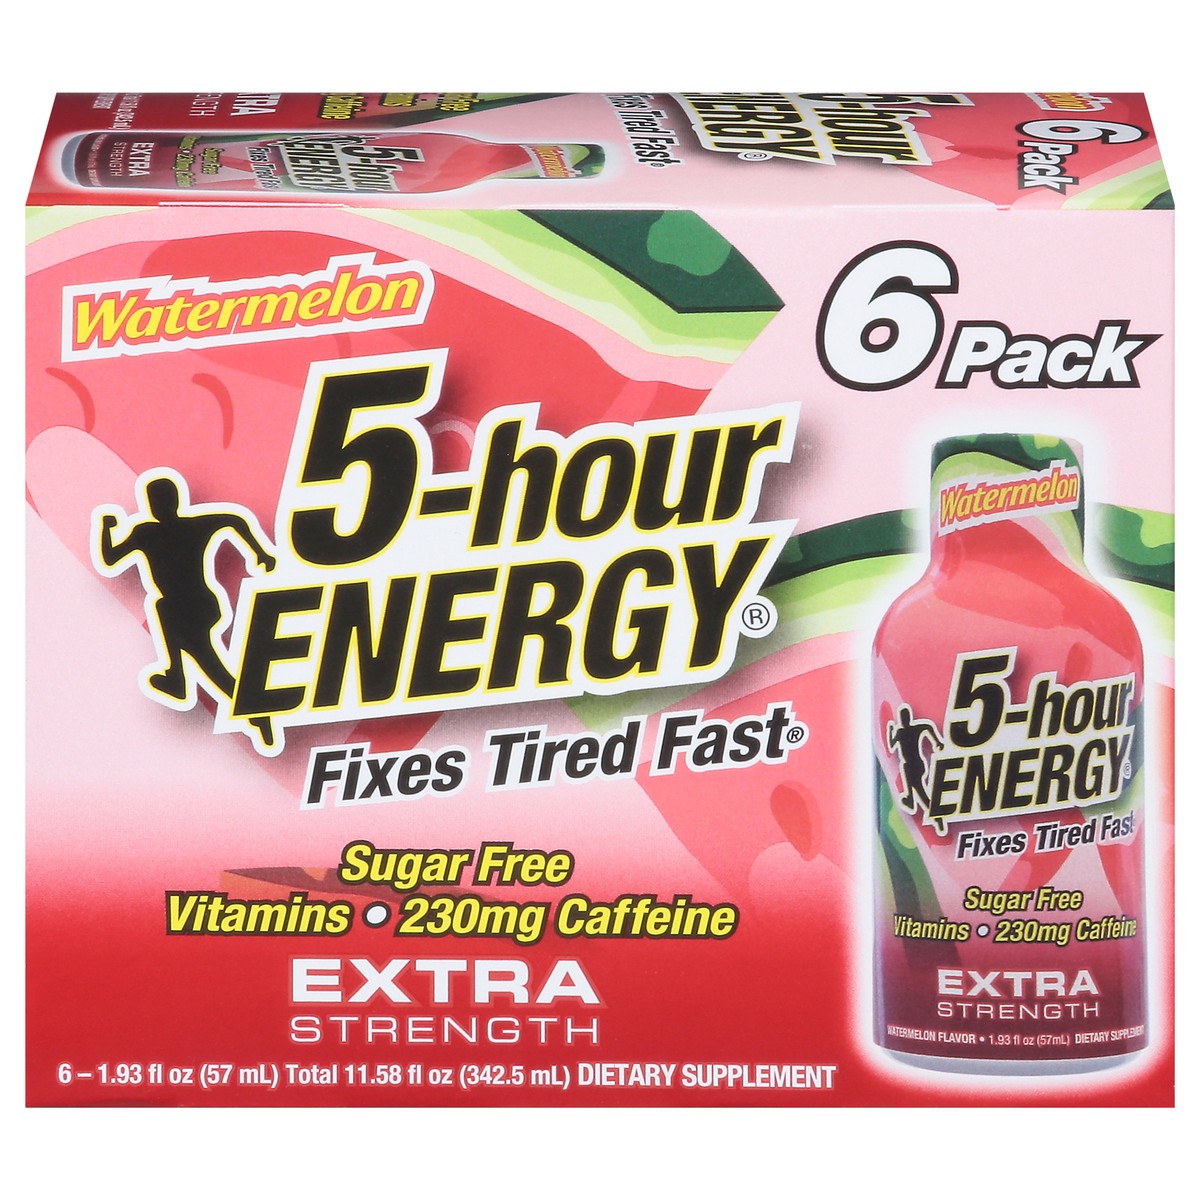 slide 14 of 15, 5-hour ENERGY 5-Hour Watermelon Extra Strength 6-pack, 6 ct